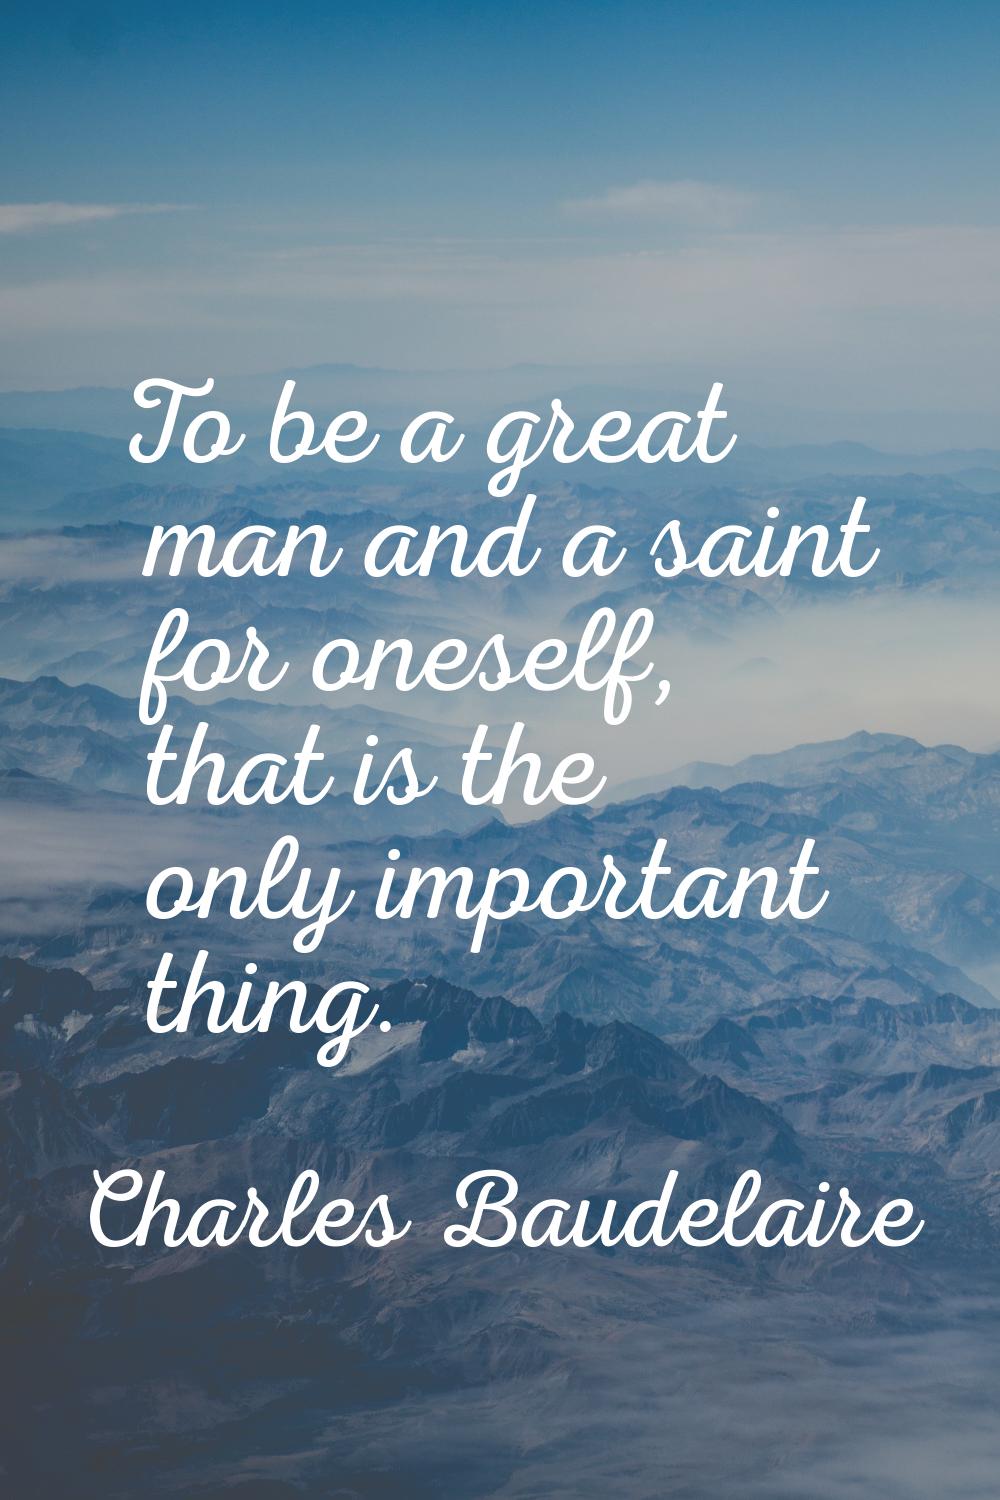 To be a great man and a saint for oneself, that is the only important thing.